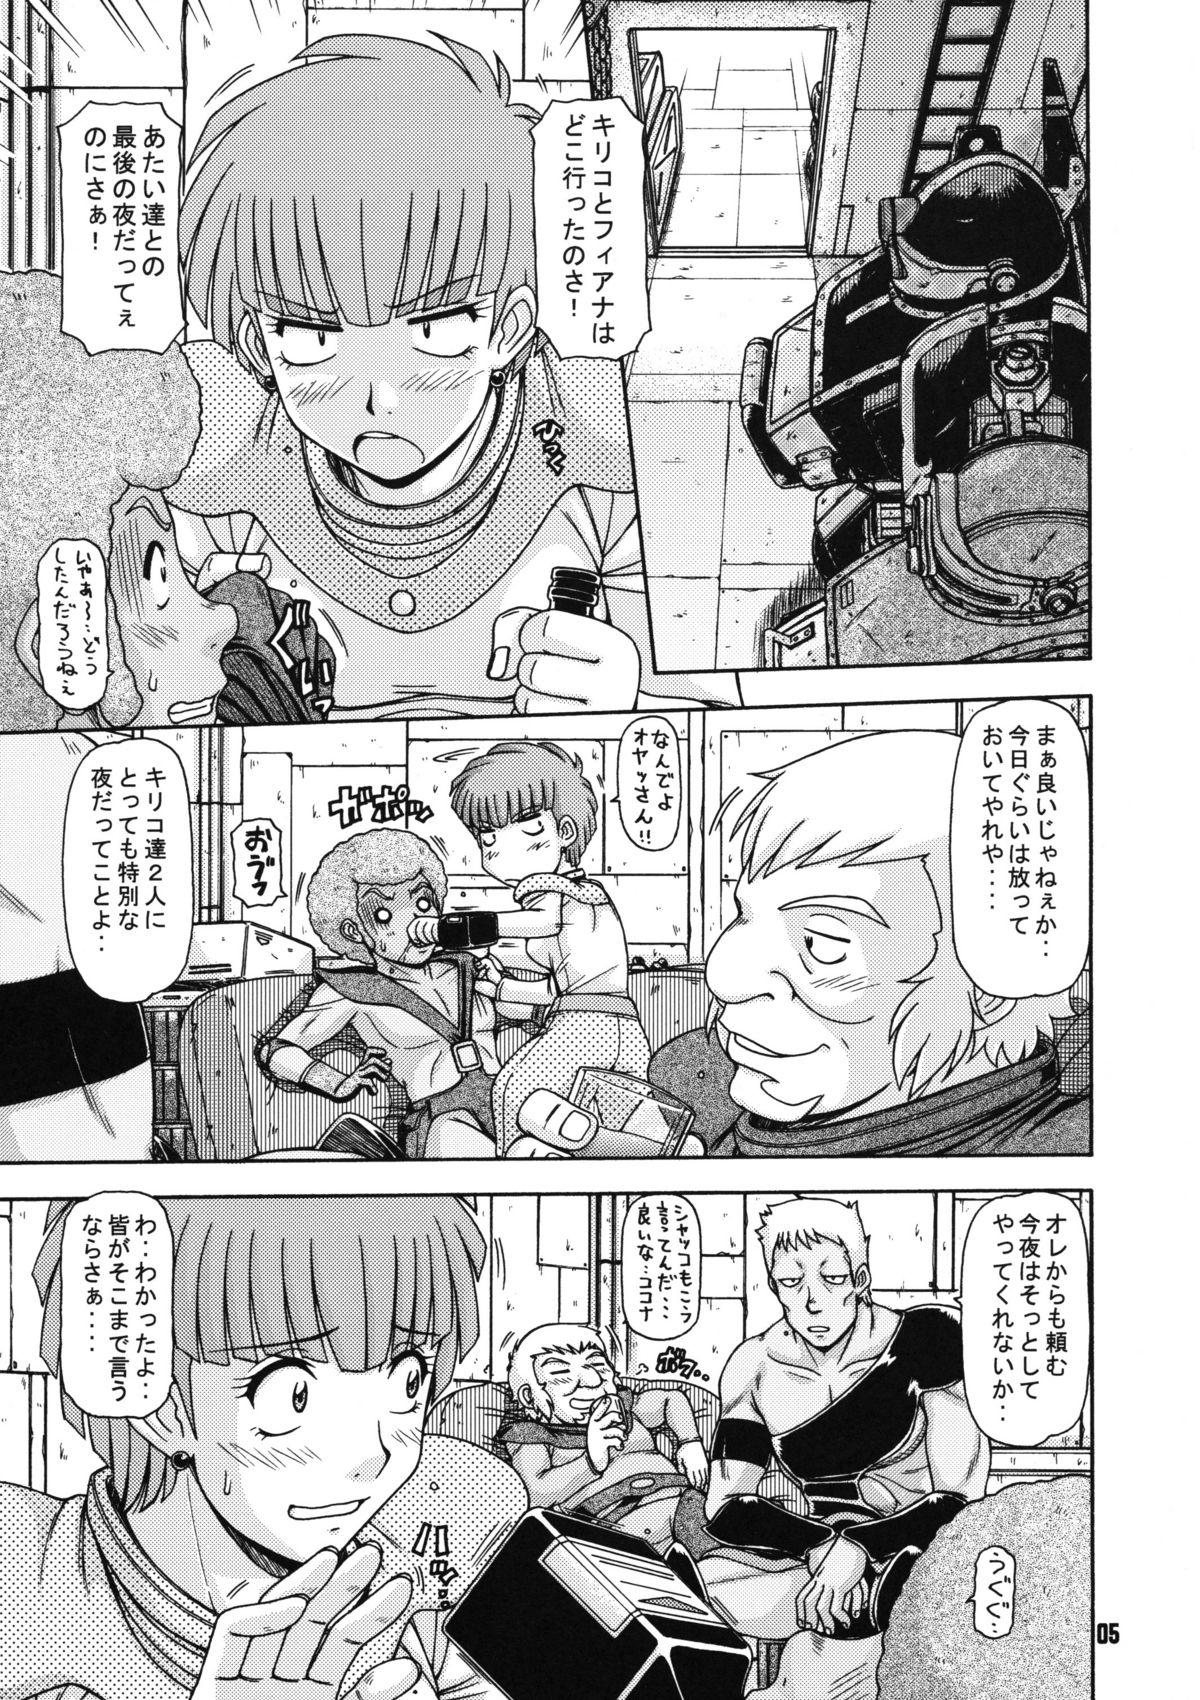 Arrecha RED MUFFLER Vo - Armored trooper votoms Twistys - Page 4